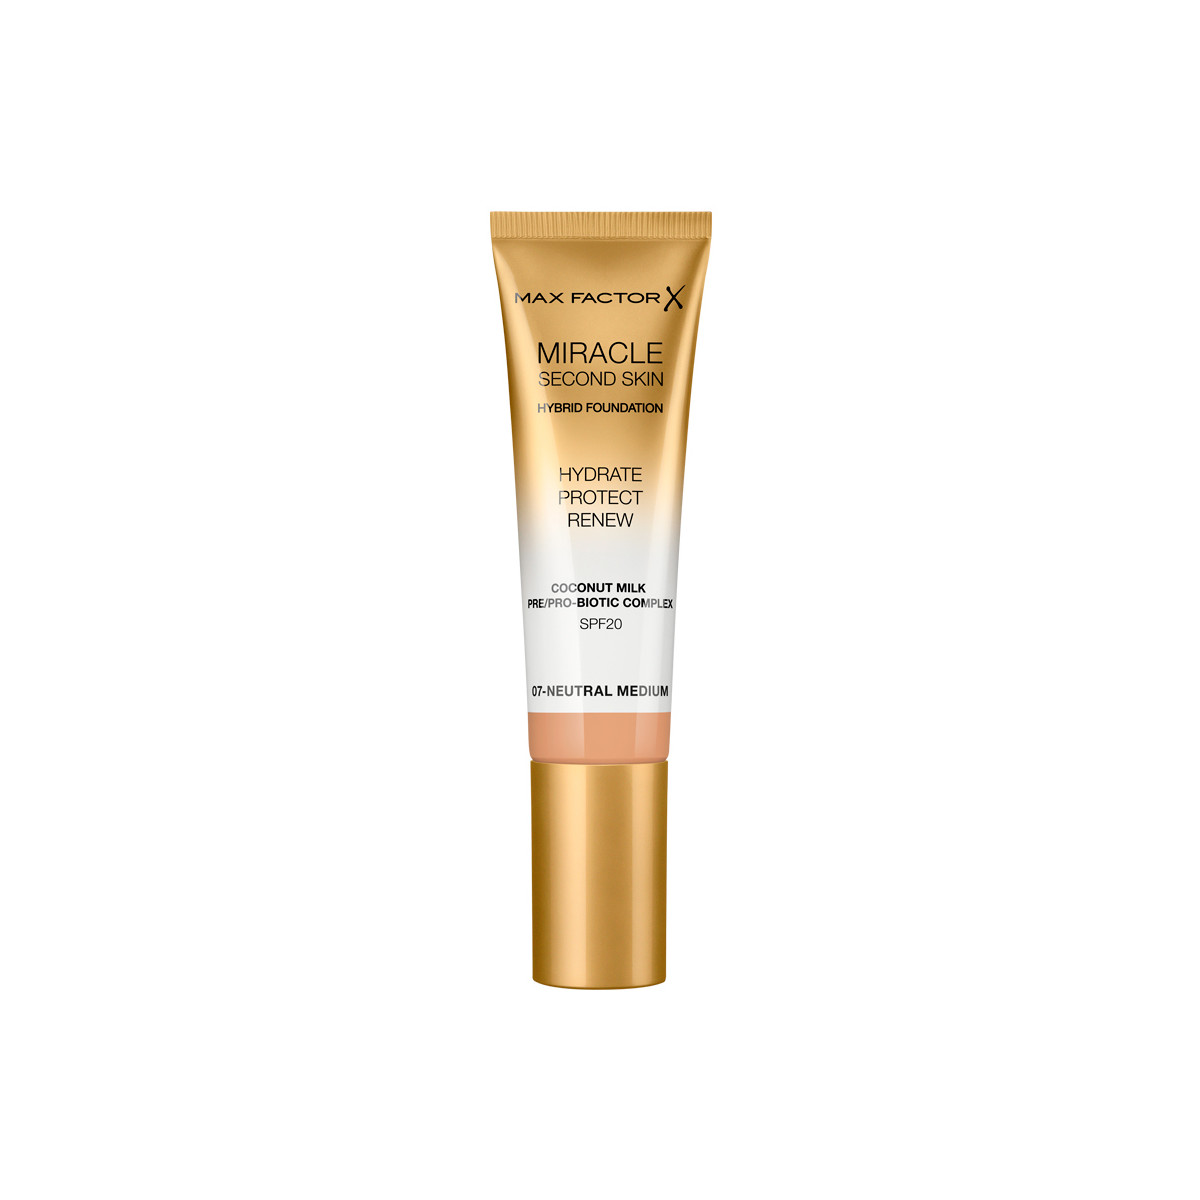 Beauty Make-up & Foundation  Max Factor Miracle Touch Second Skin Found.spf20 7-neutral Medium 